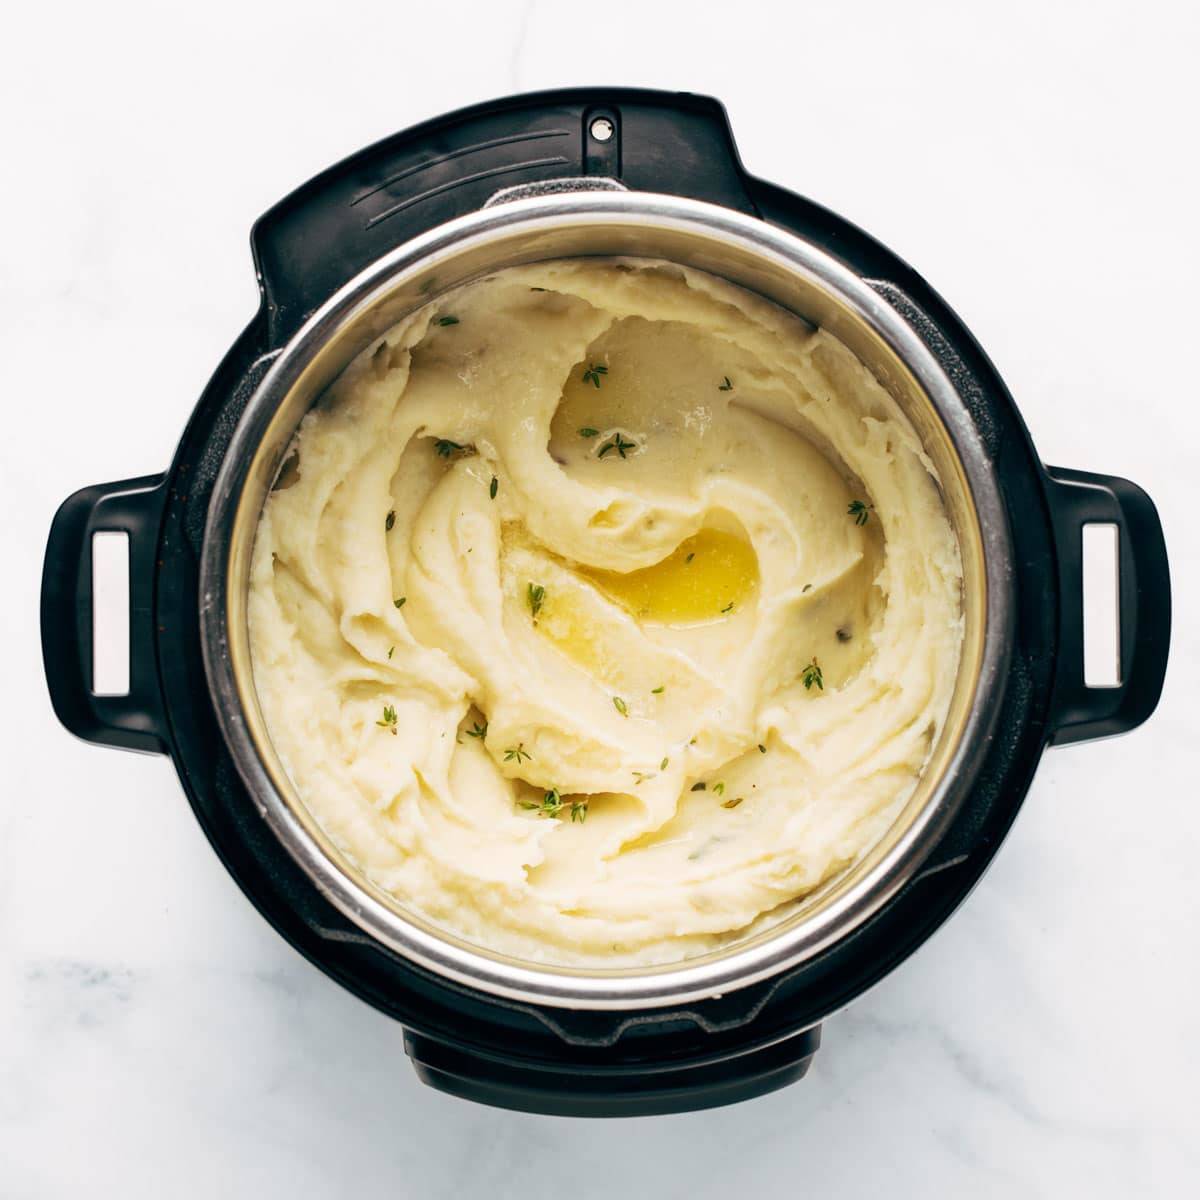 Mashed potatoes in the Instant Pot.